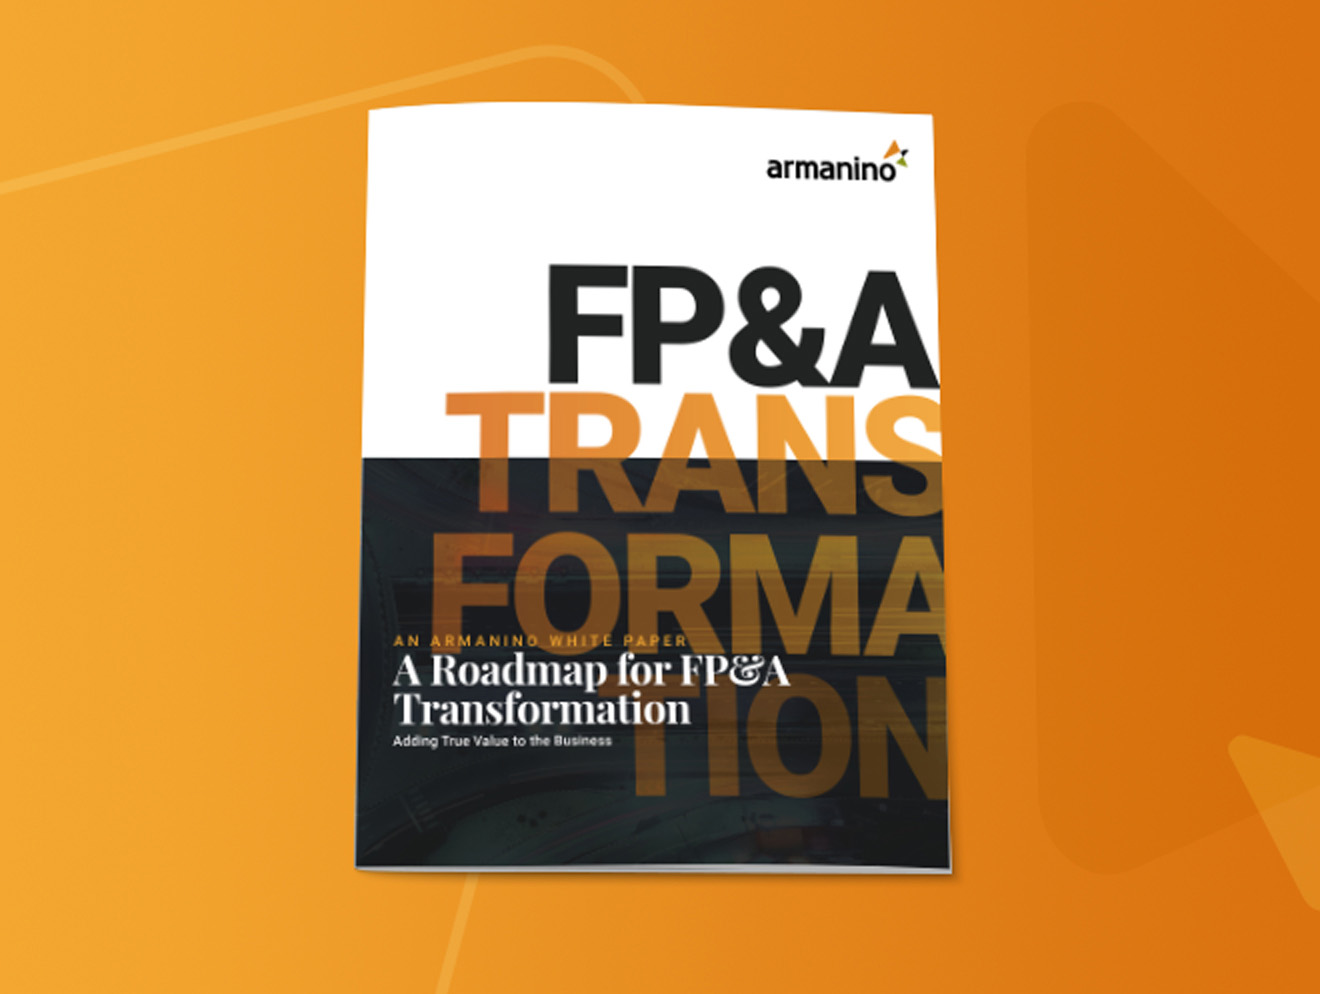 A Roadmap for FP&A Transformation: Adding True Value to the Business